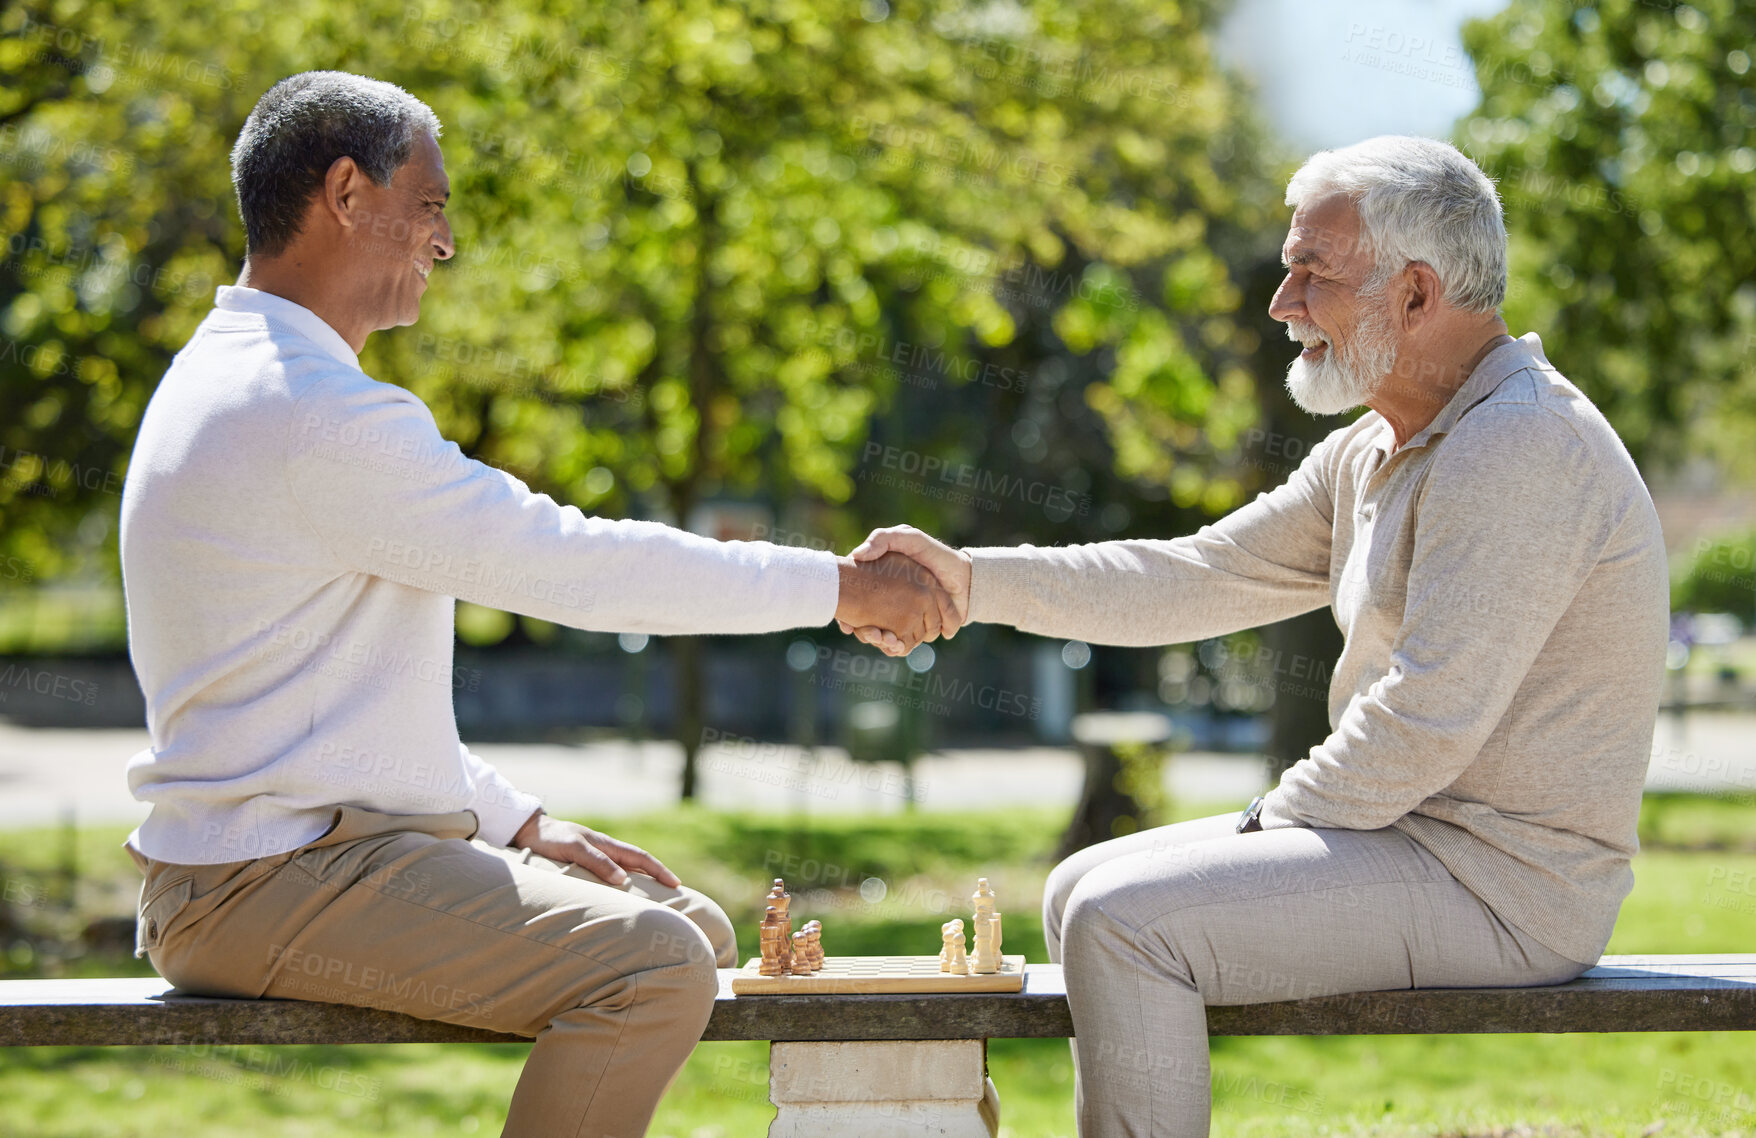 Buy stock photo Shot of two senior men sitting together on a bench in the park and shaking hands before playing chess